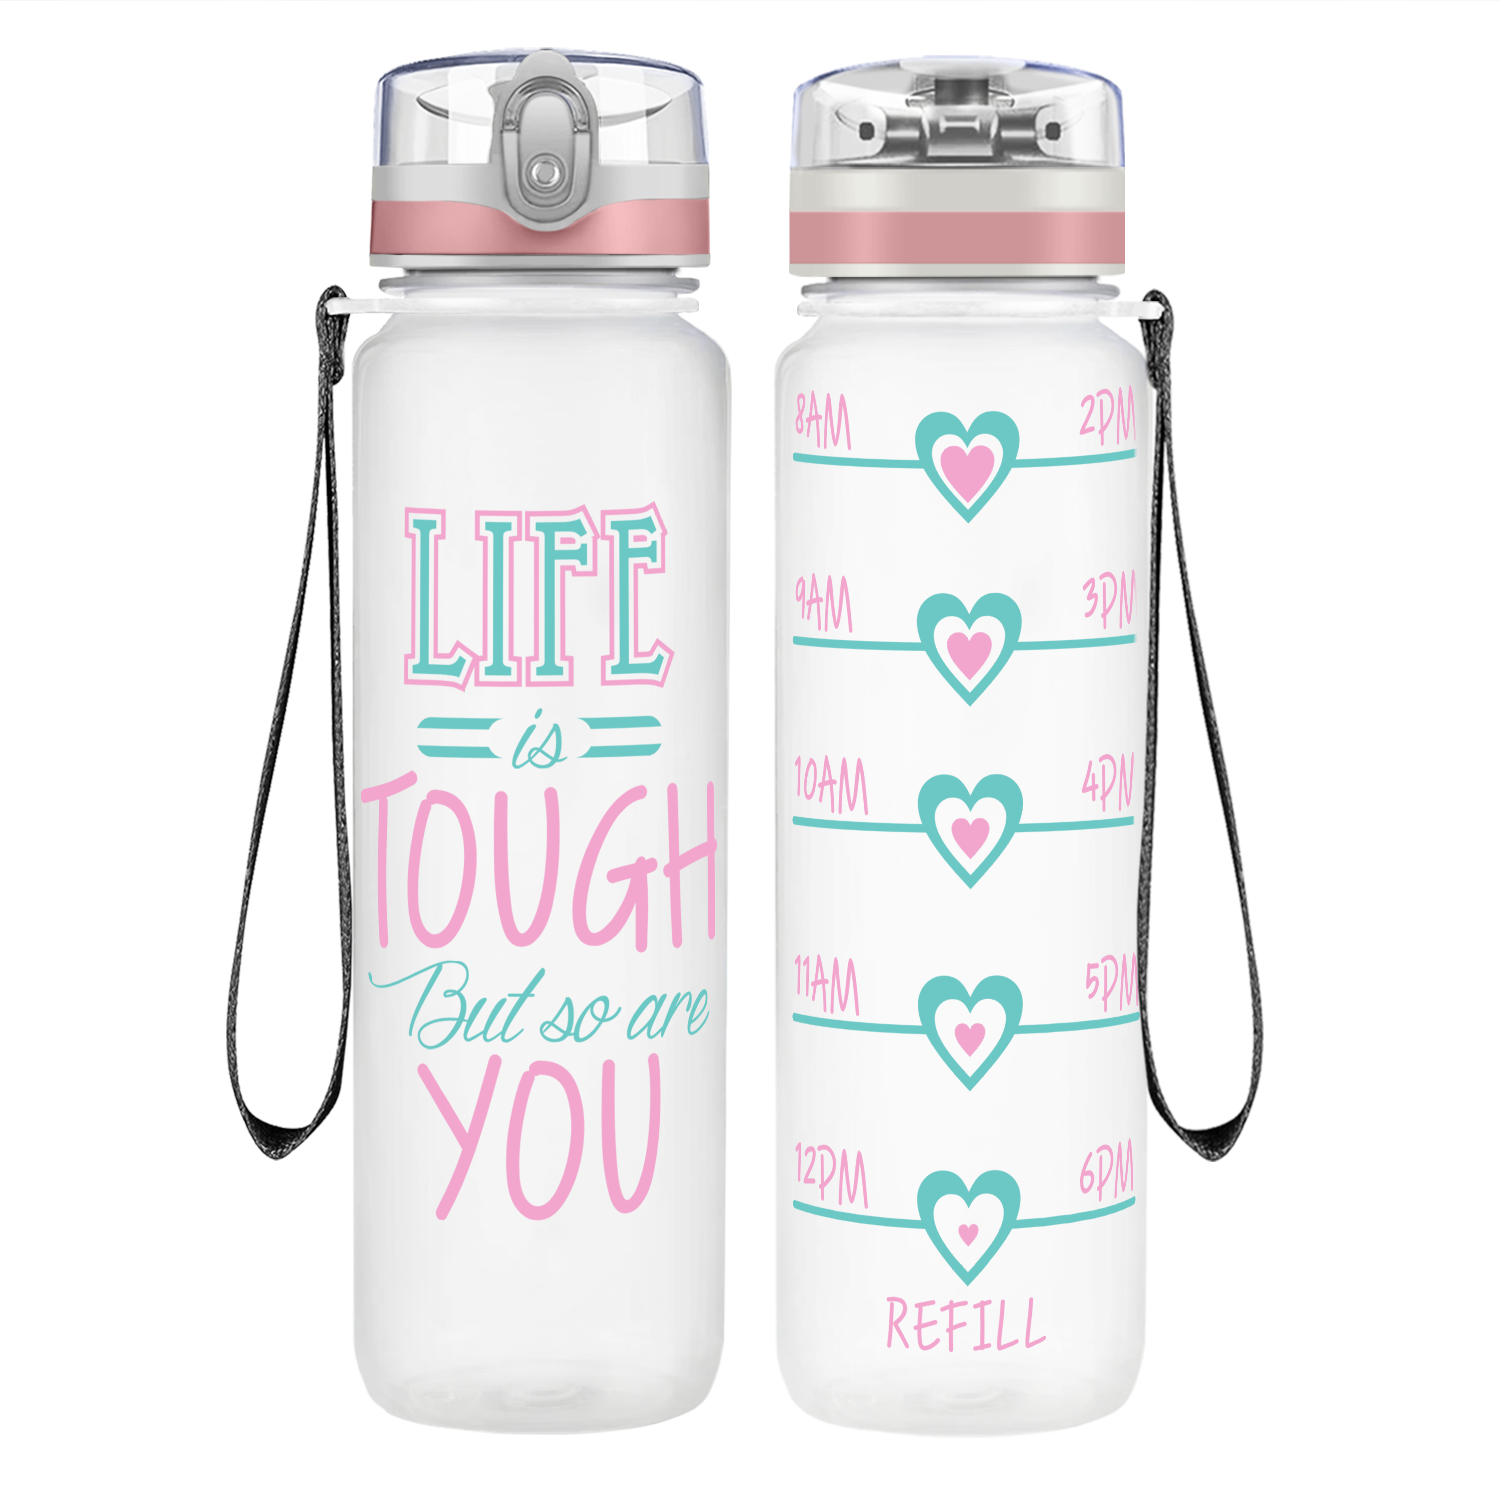 Life is Tough But So Are You 32 oz Motivational Tracking Inspirational Water Bottle